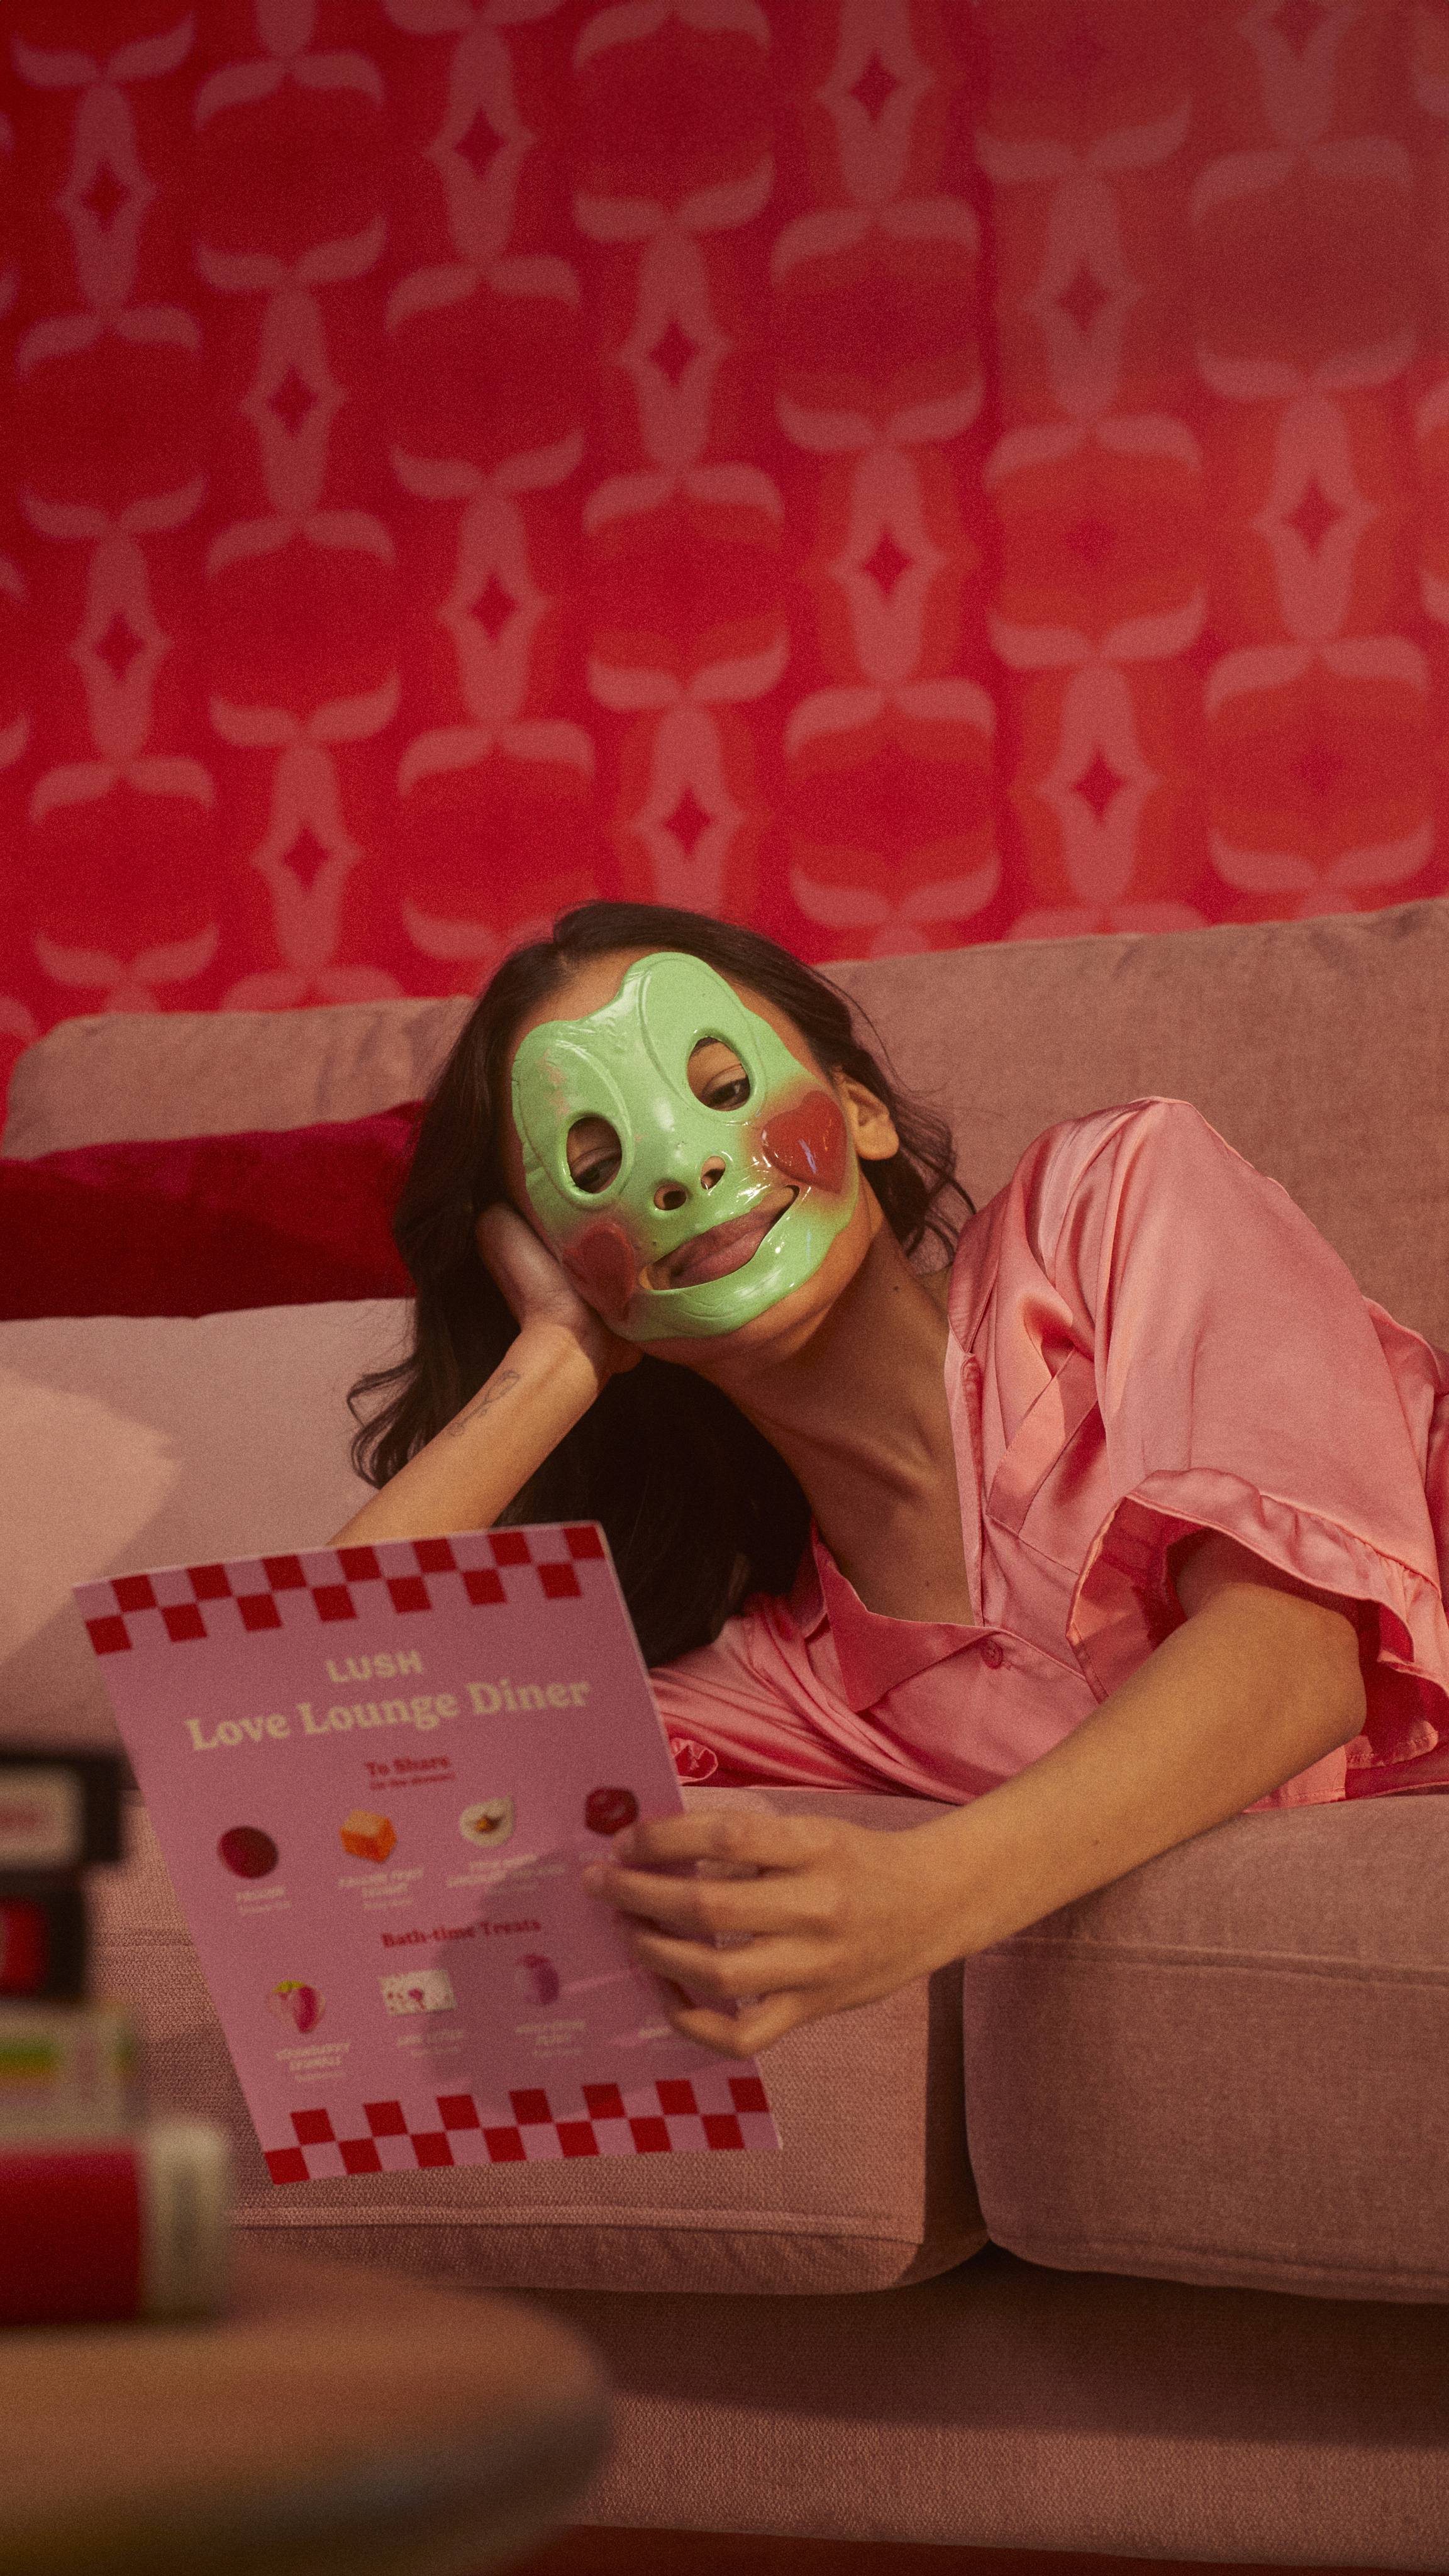 The model is laid down on a sofa in pink satin pyjamas reading a leaflet with the Prince Charming face mask on.